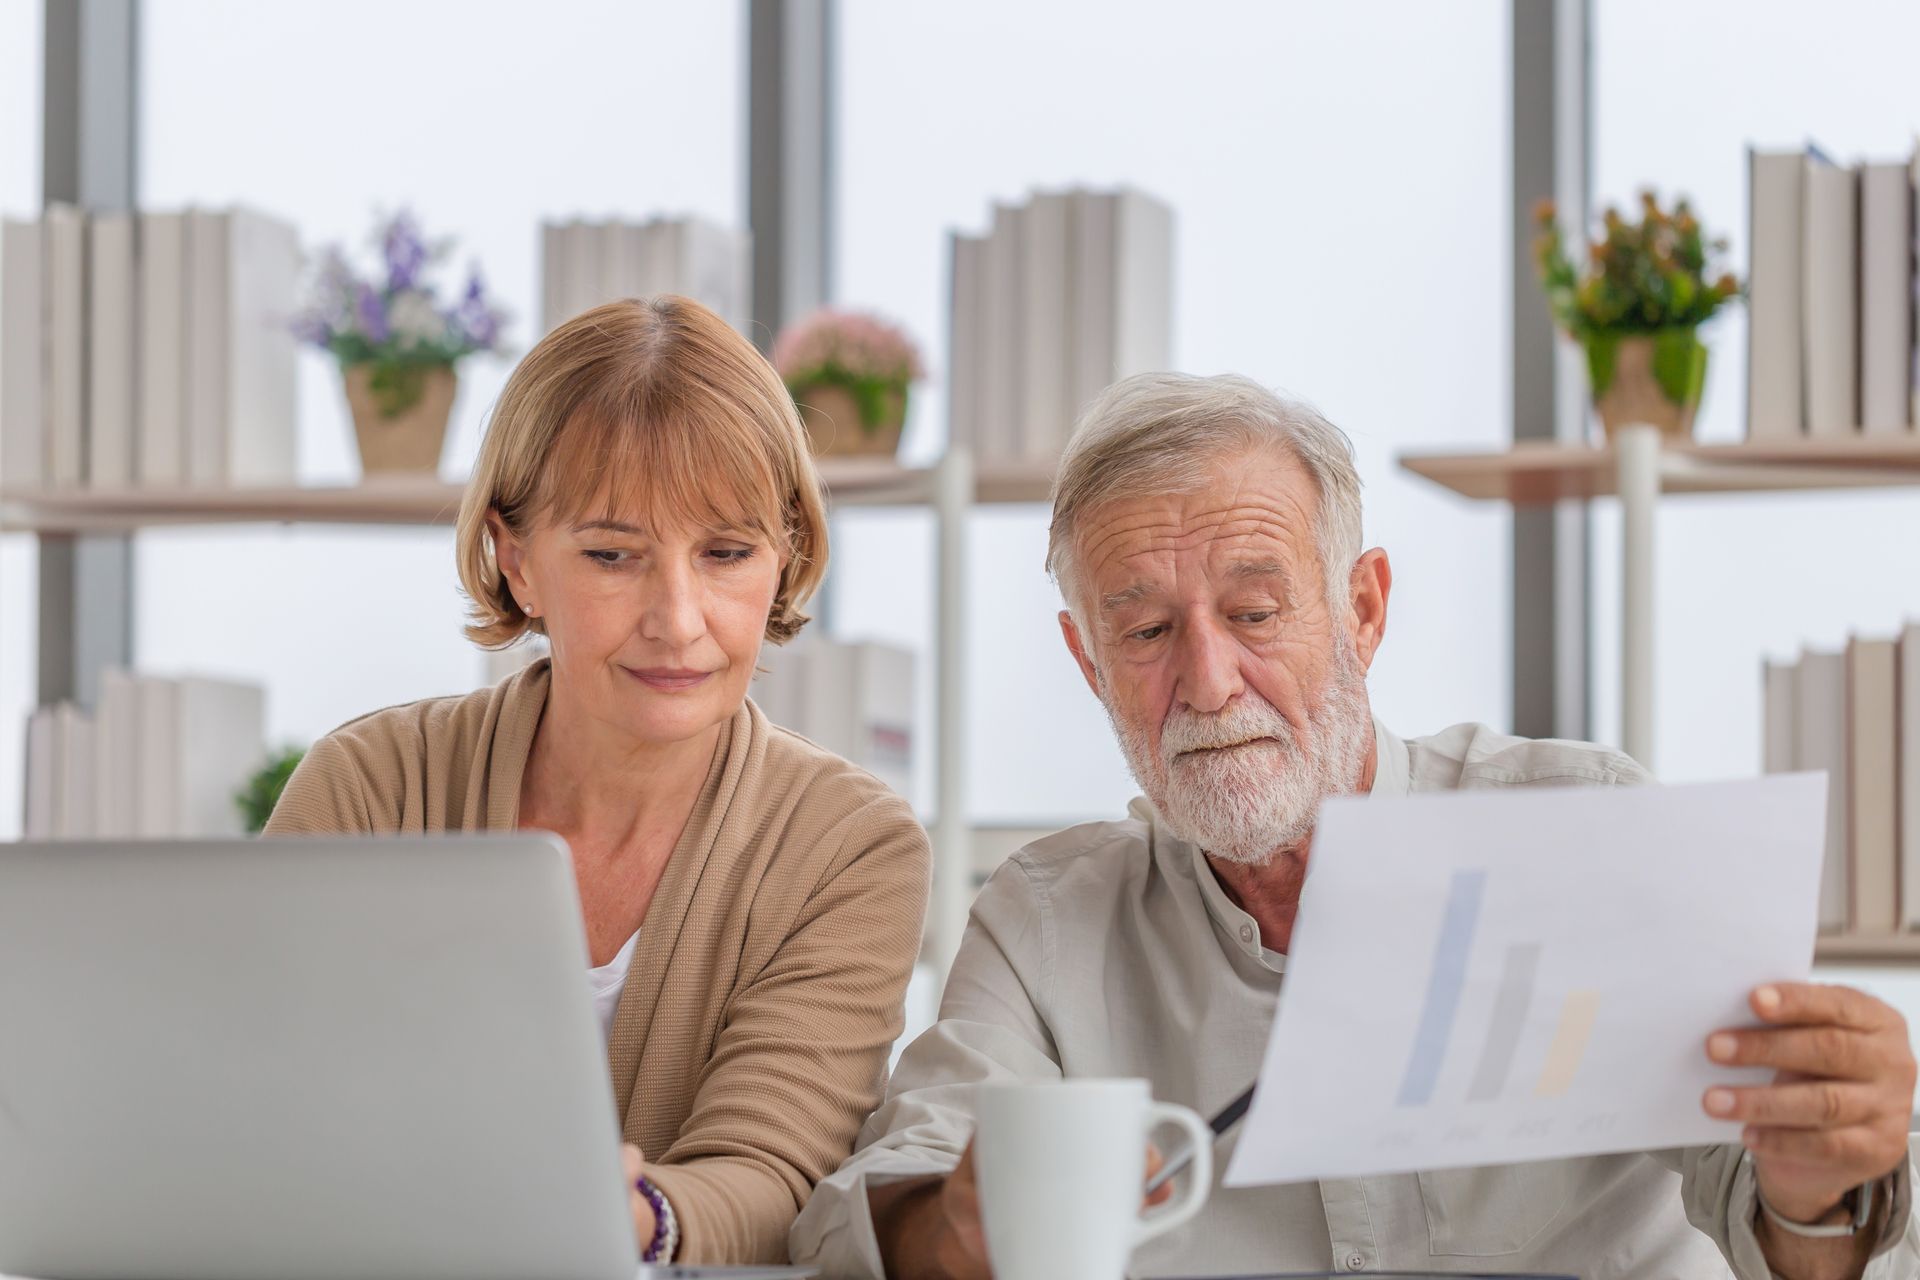 Three risks you may encounter if you're unprepared for retirement.